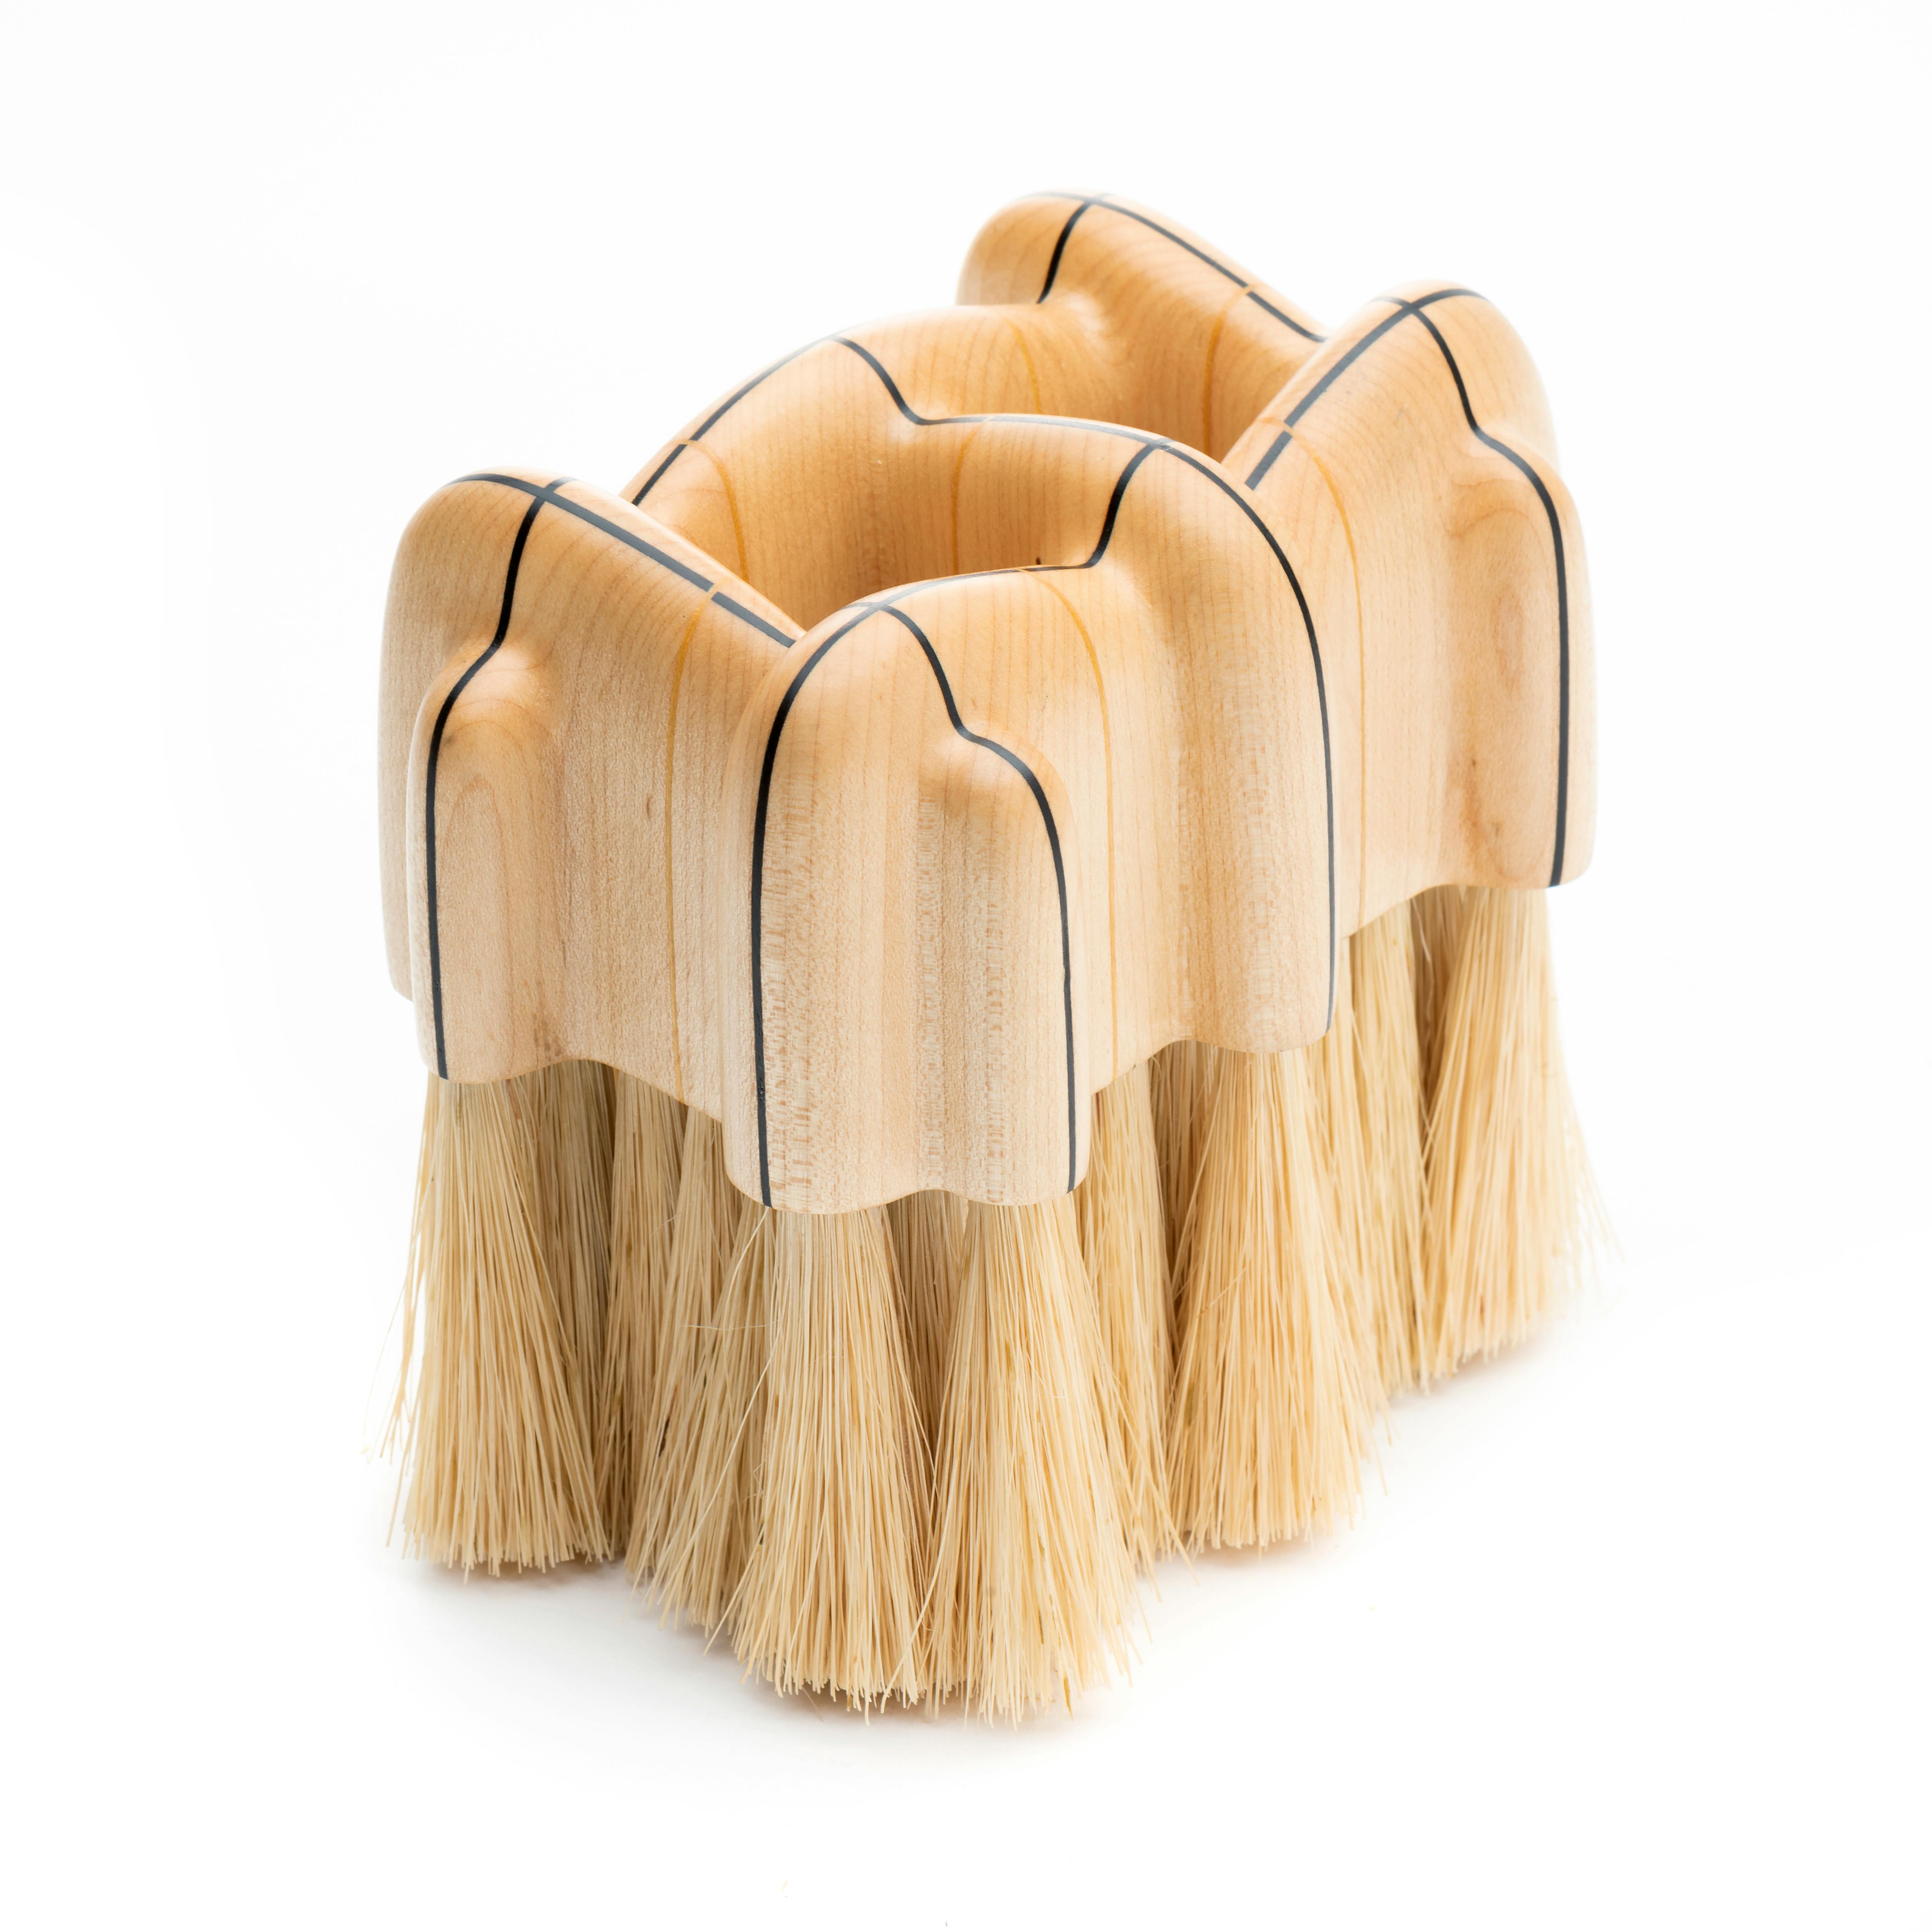 wooden brush with natural fibers and a handle that you pinch your fingers into